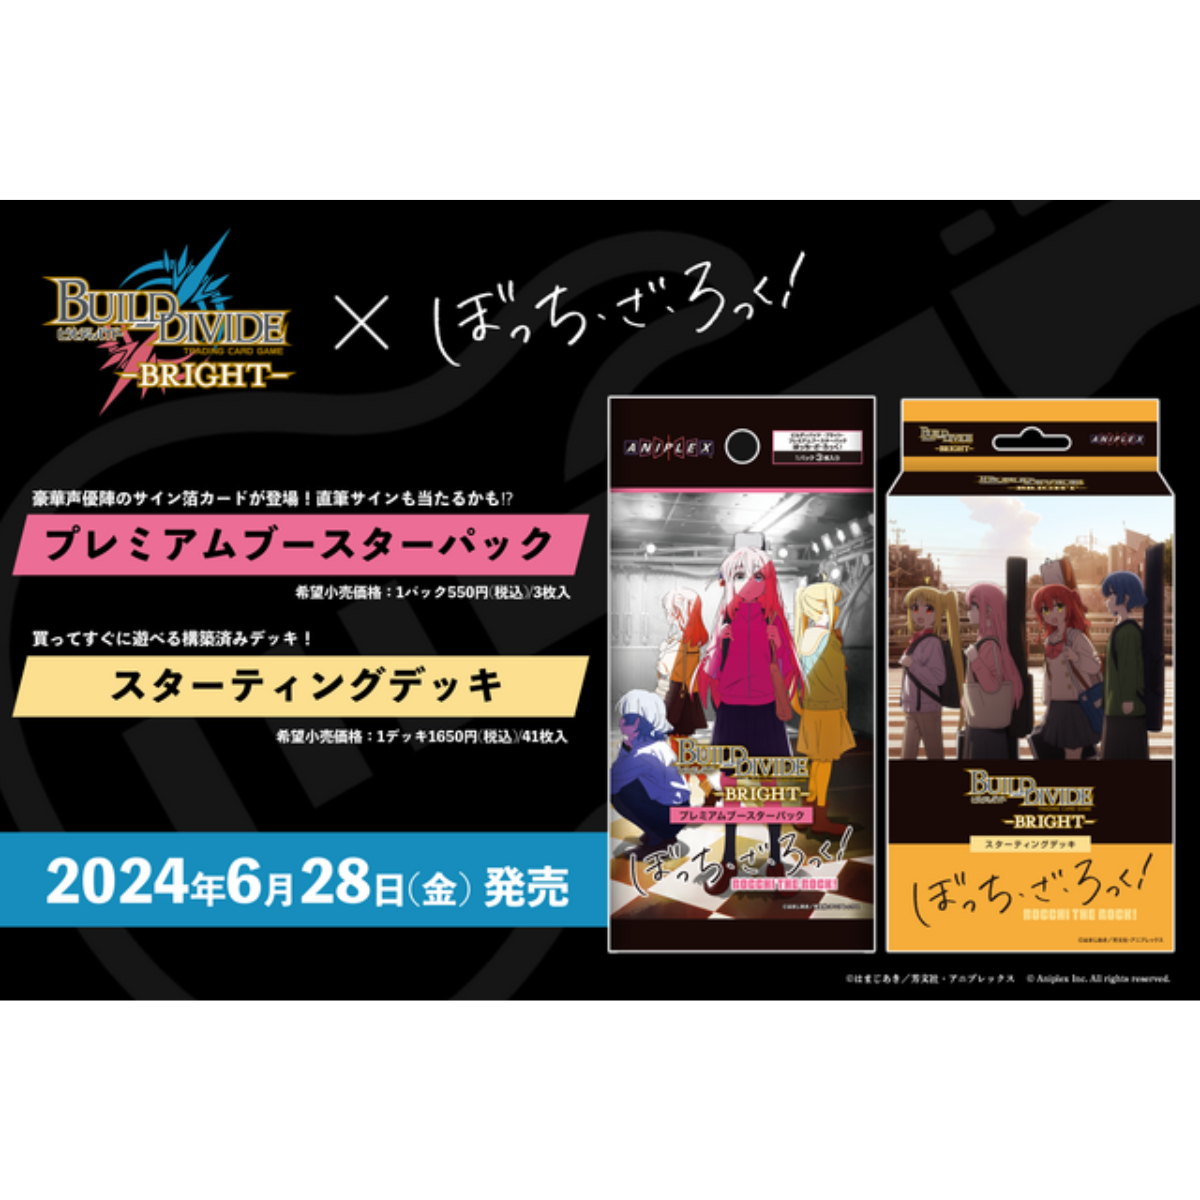 Build Divide -Bright- Premium Booster "Bocchi The Rock" (Japanese)-Booster Pack (Random)-Aniplex-Ace Cards & Collectibles